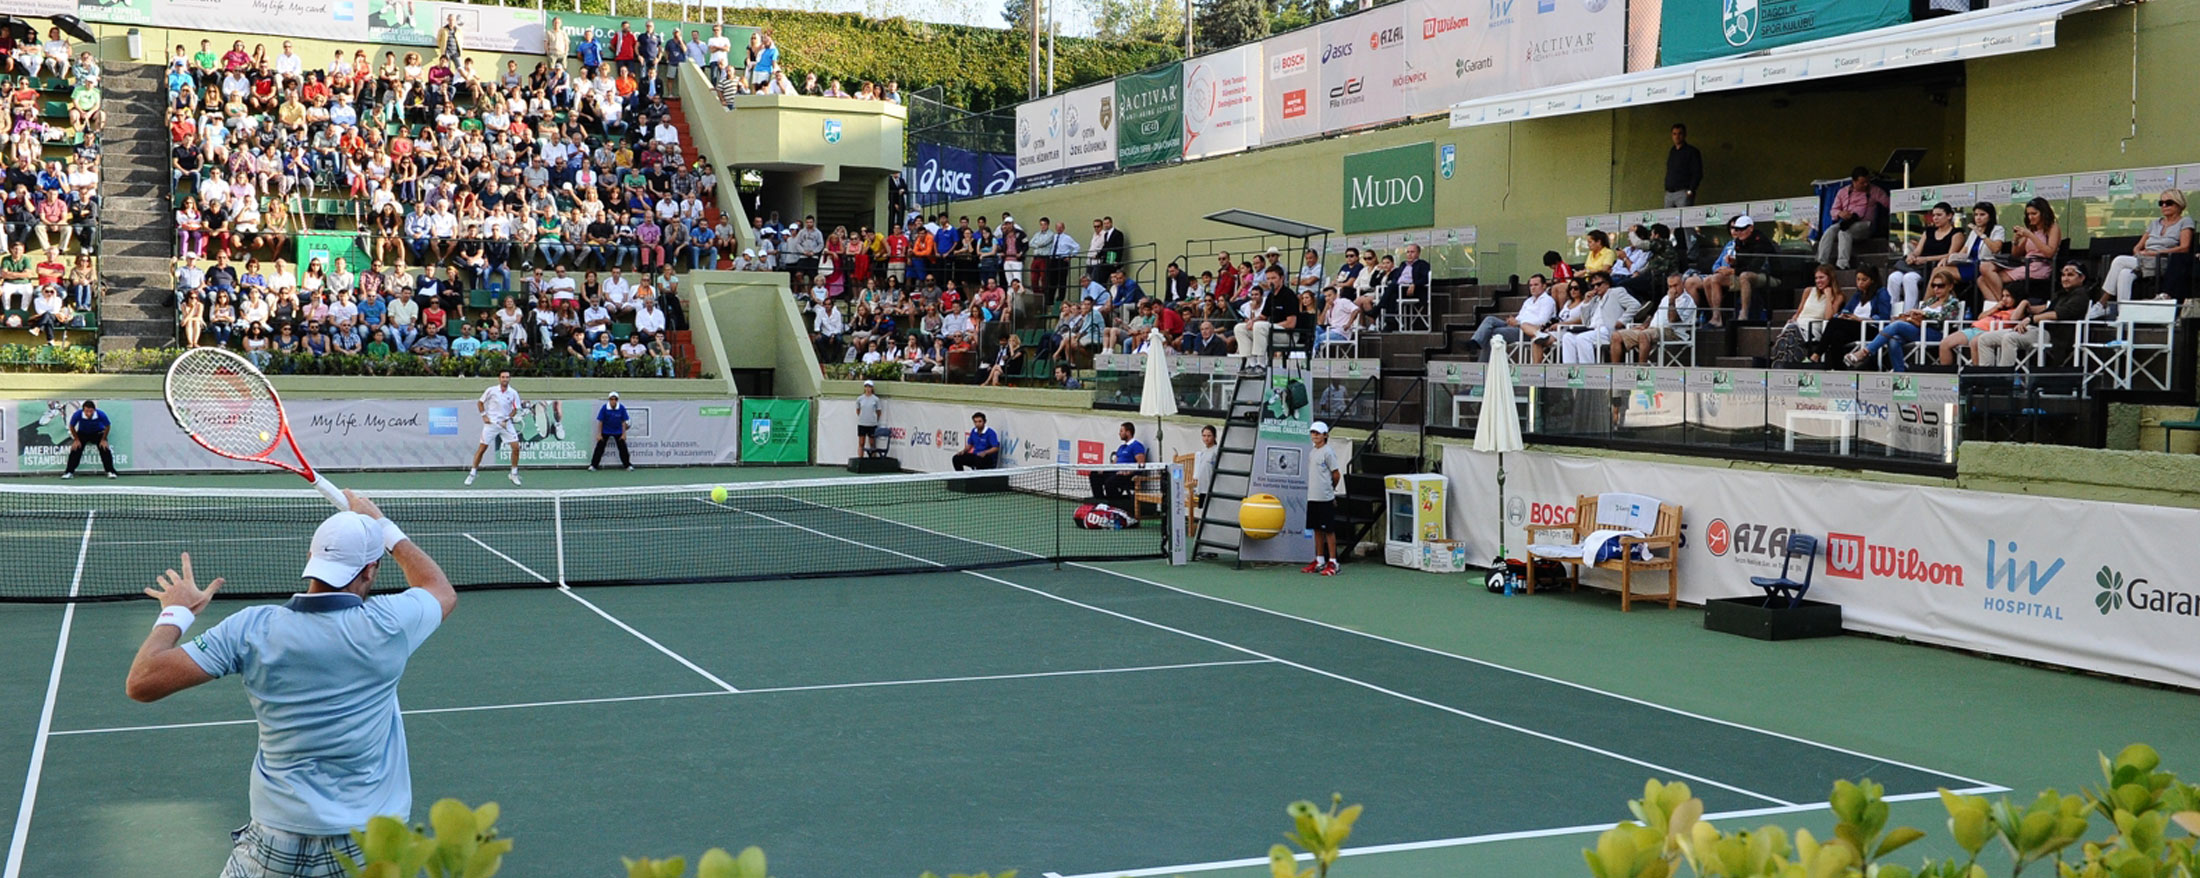 challenger istanbul tennis live